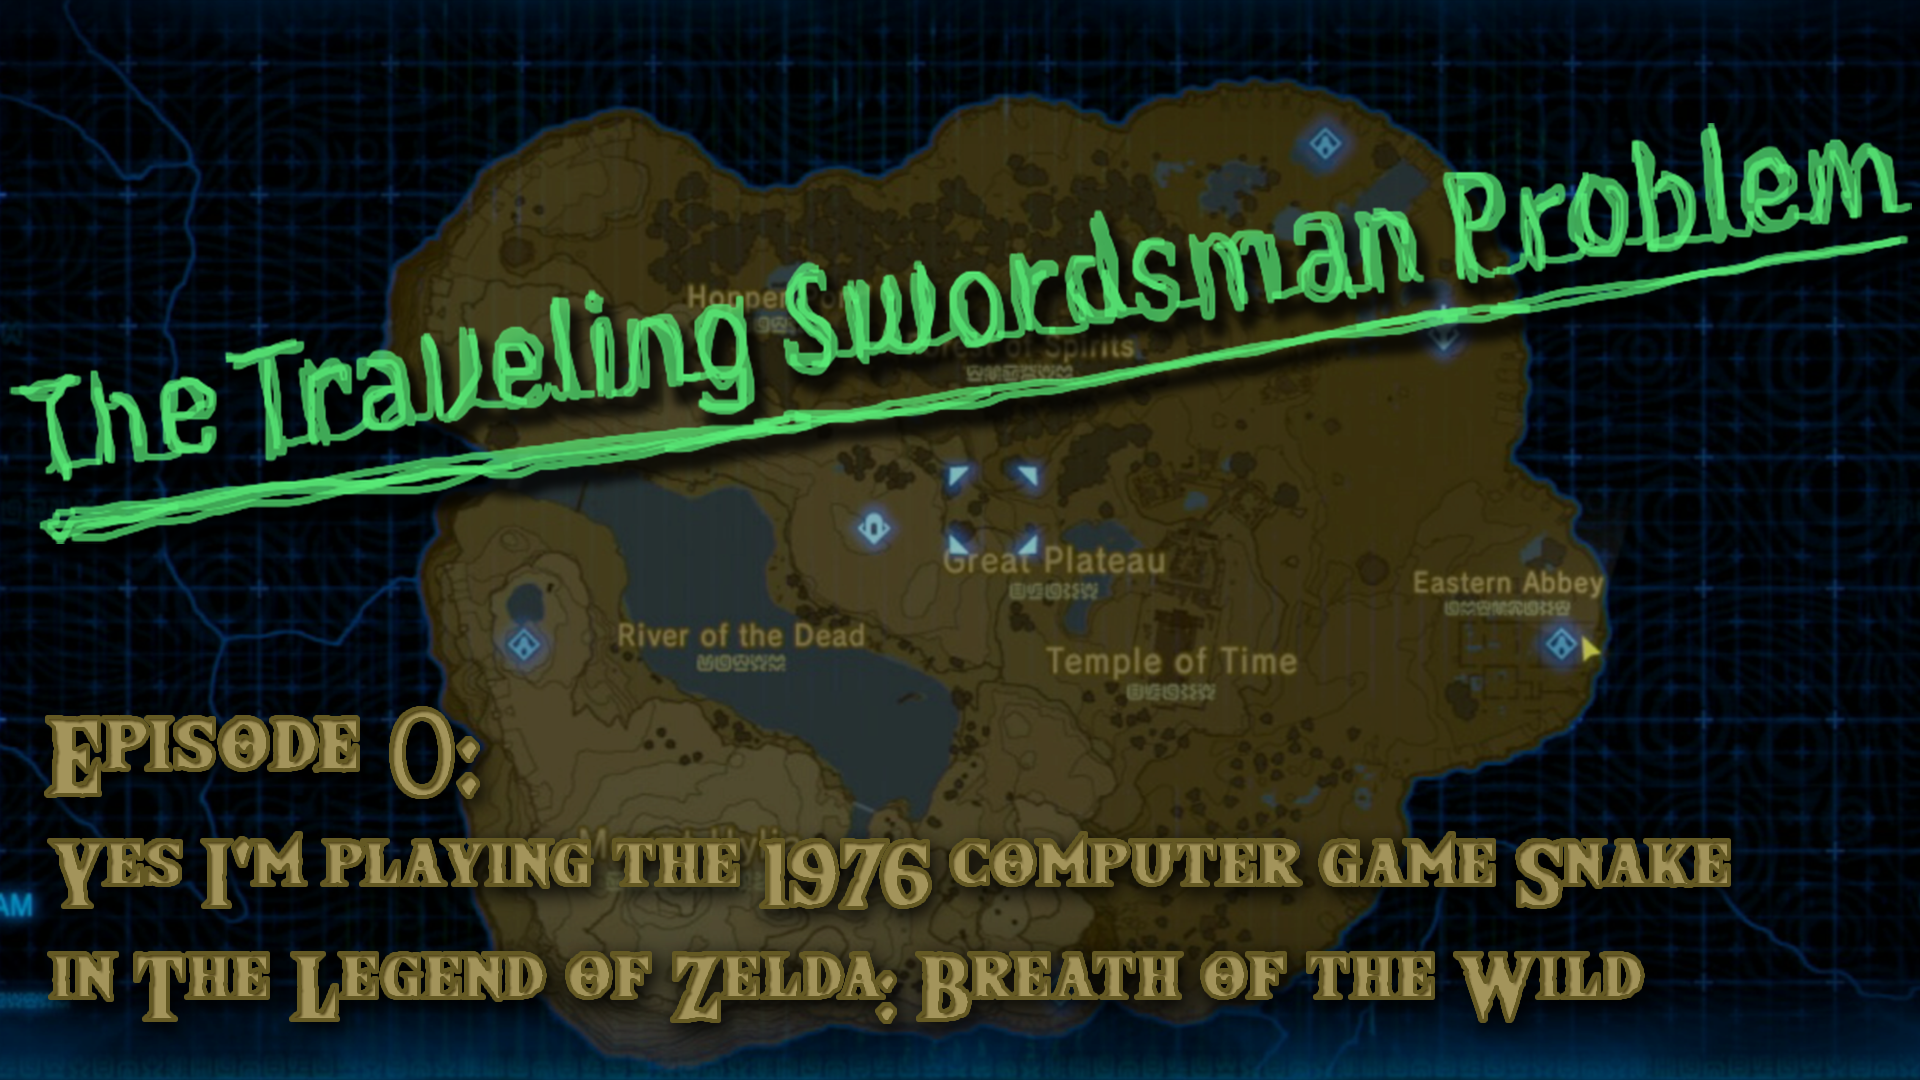 episode zero: yes i am playing the 1976 computer game snake inside of the legend of zelda breath of the wild